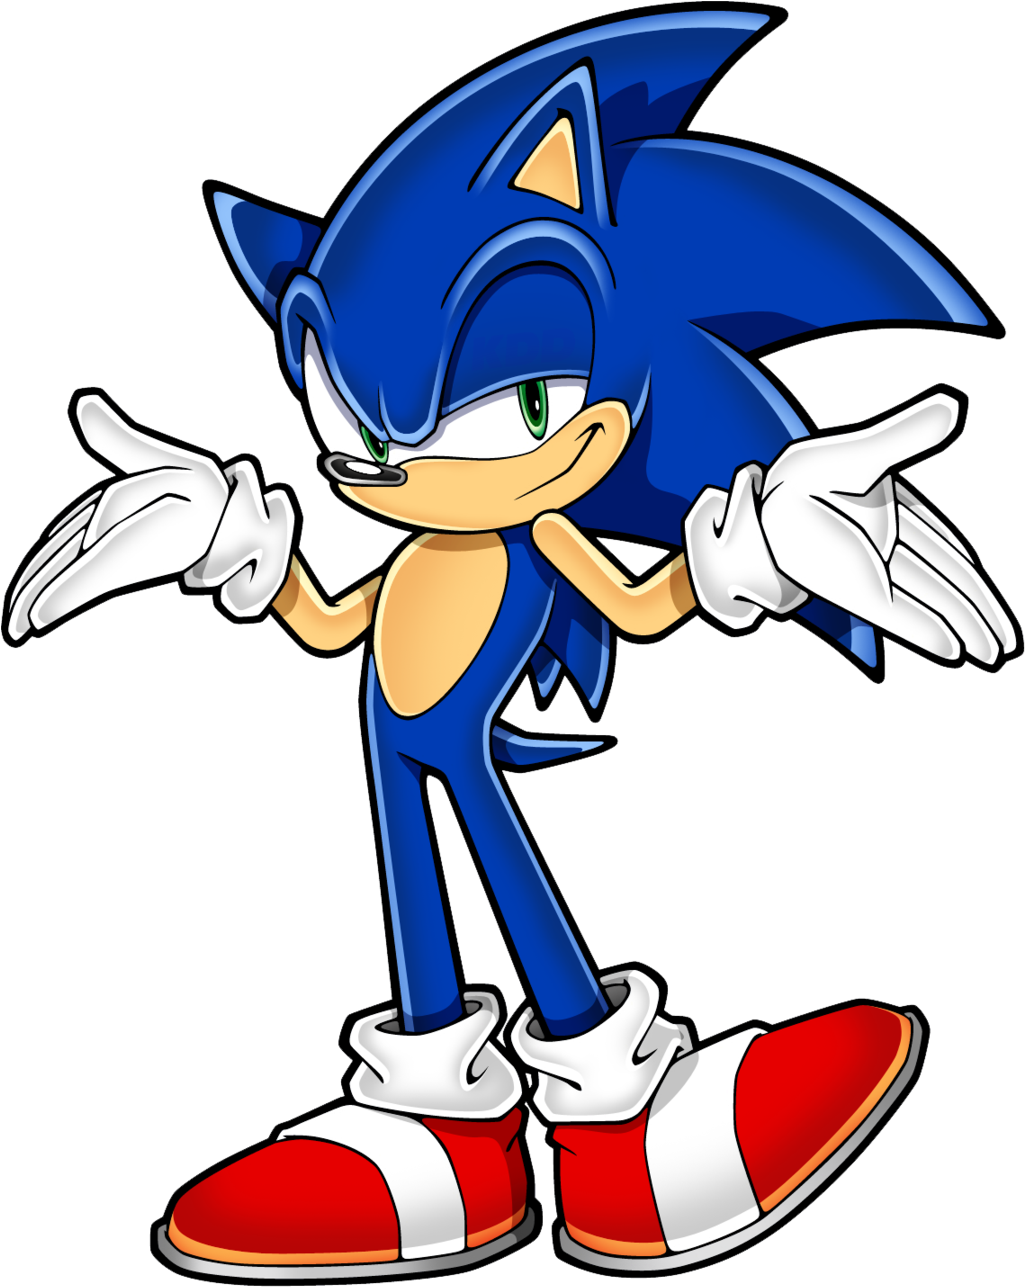 Sonic The Hedgehog Character Pose PNG image